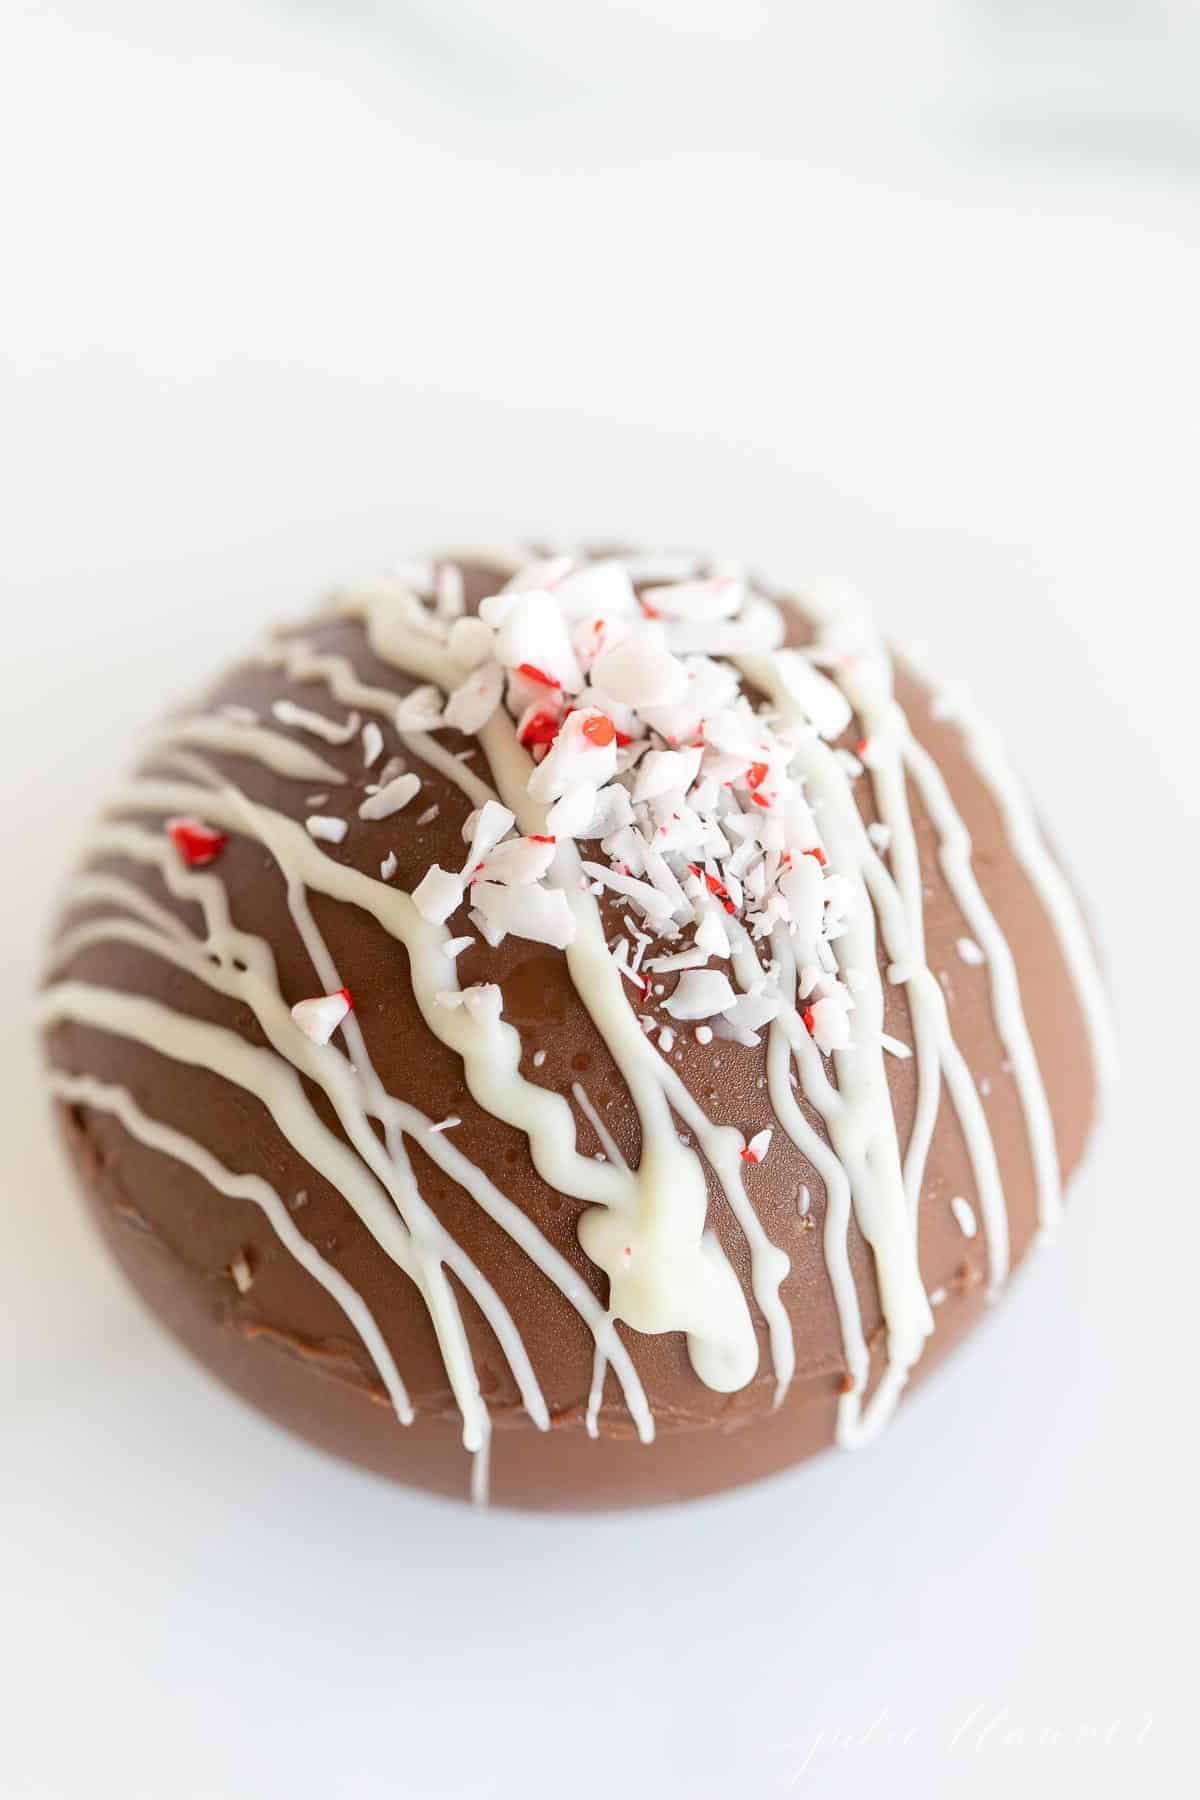 Hot chocolate bomb topped with crushed peppermint on a marble surface.